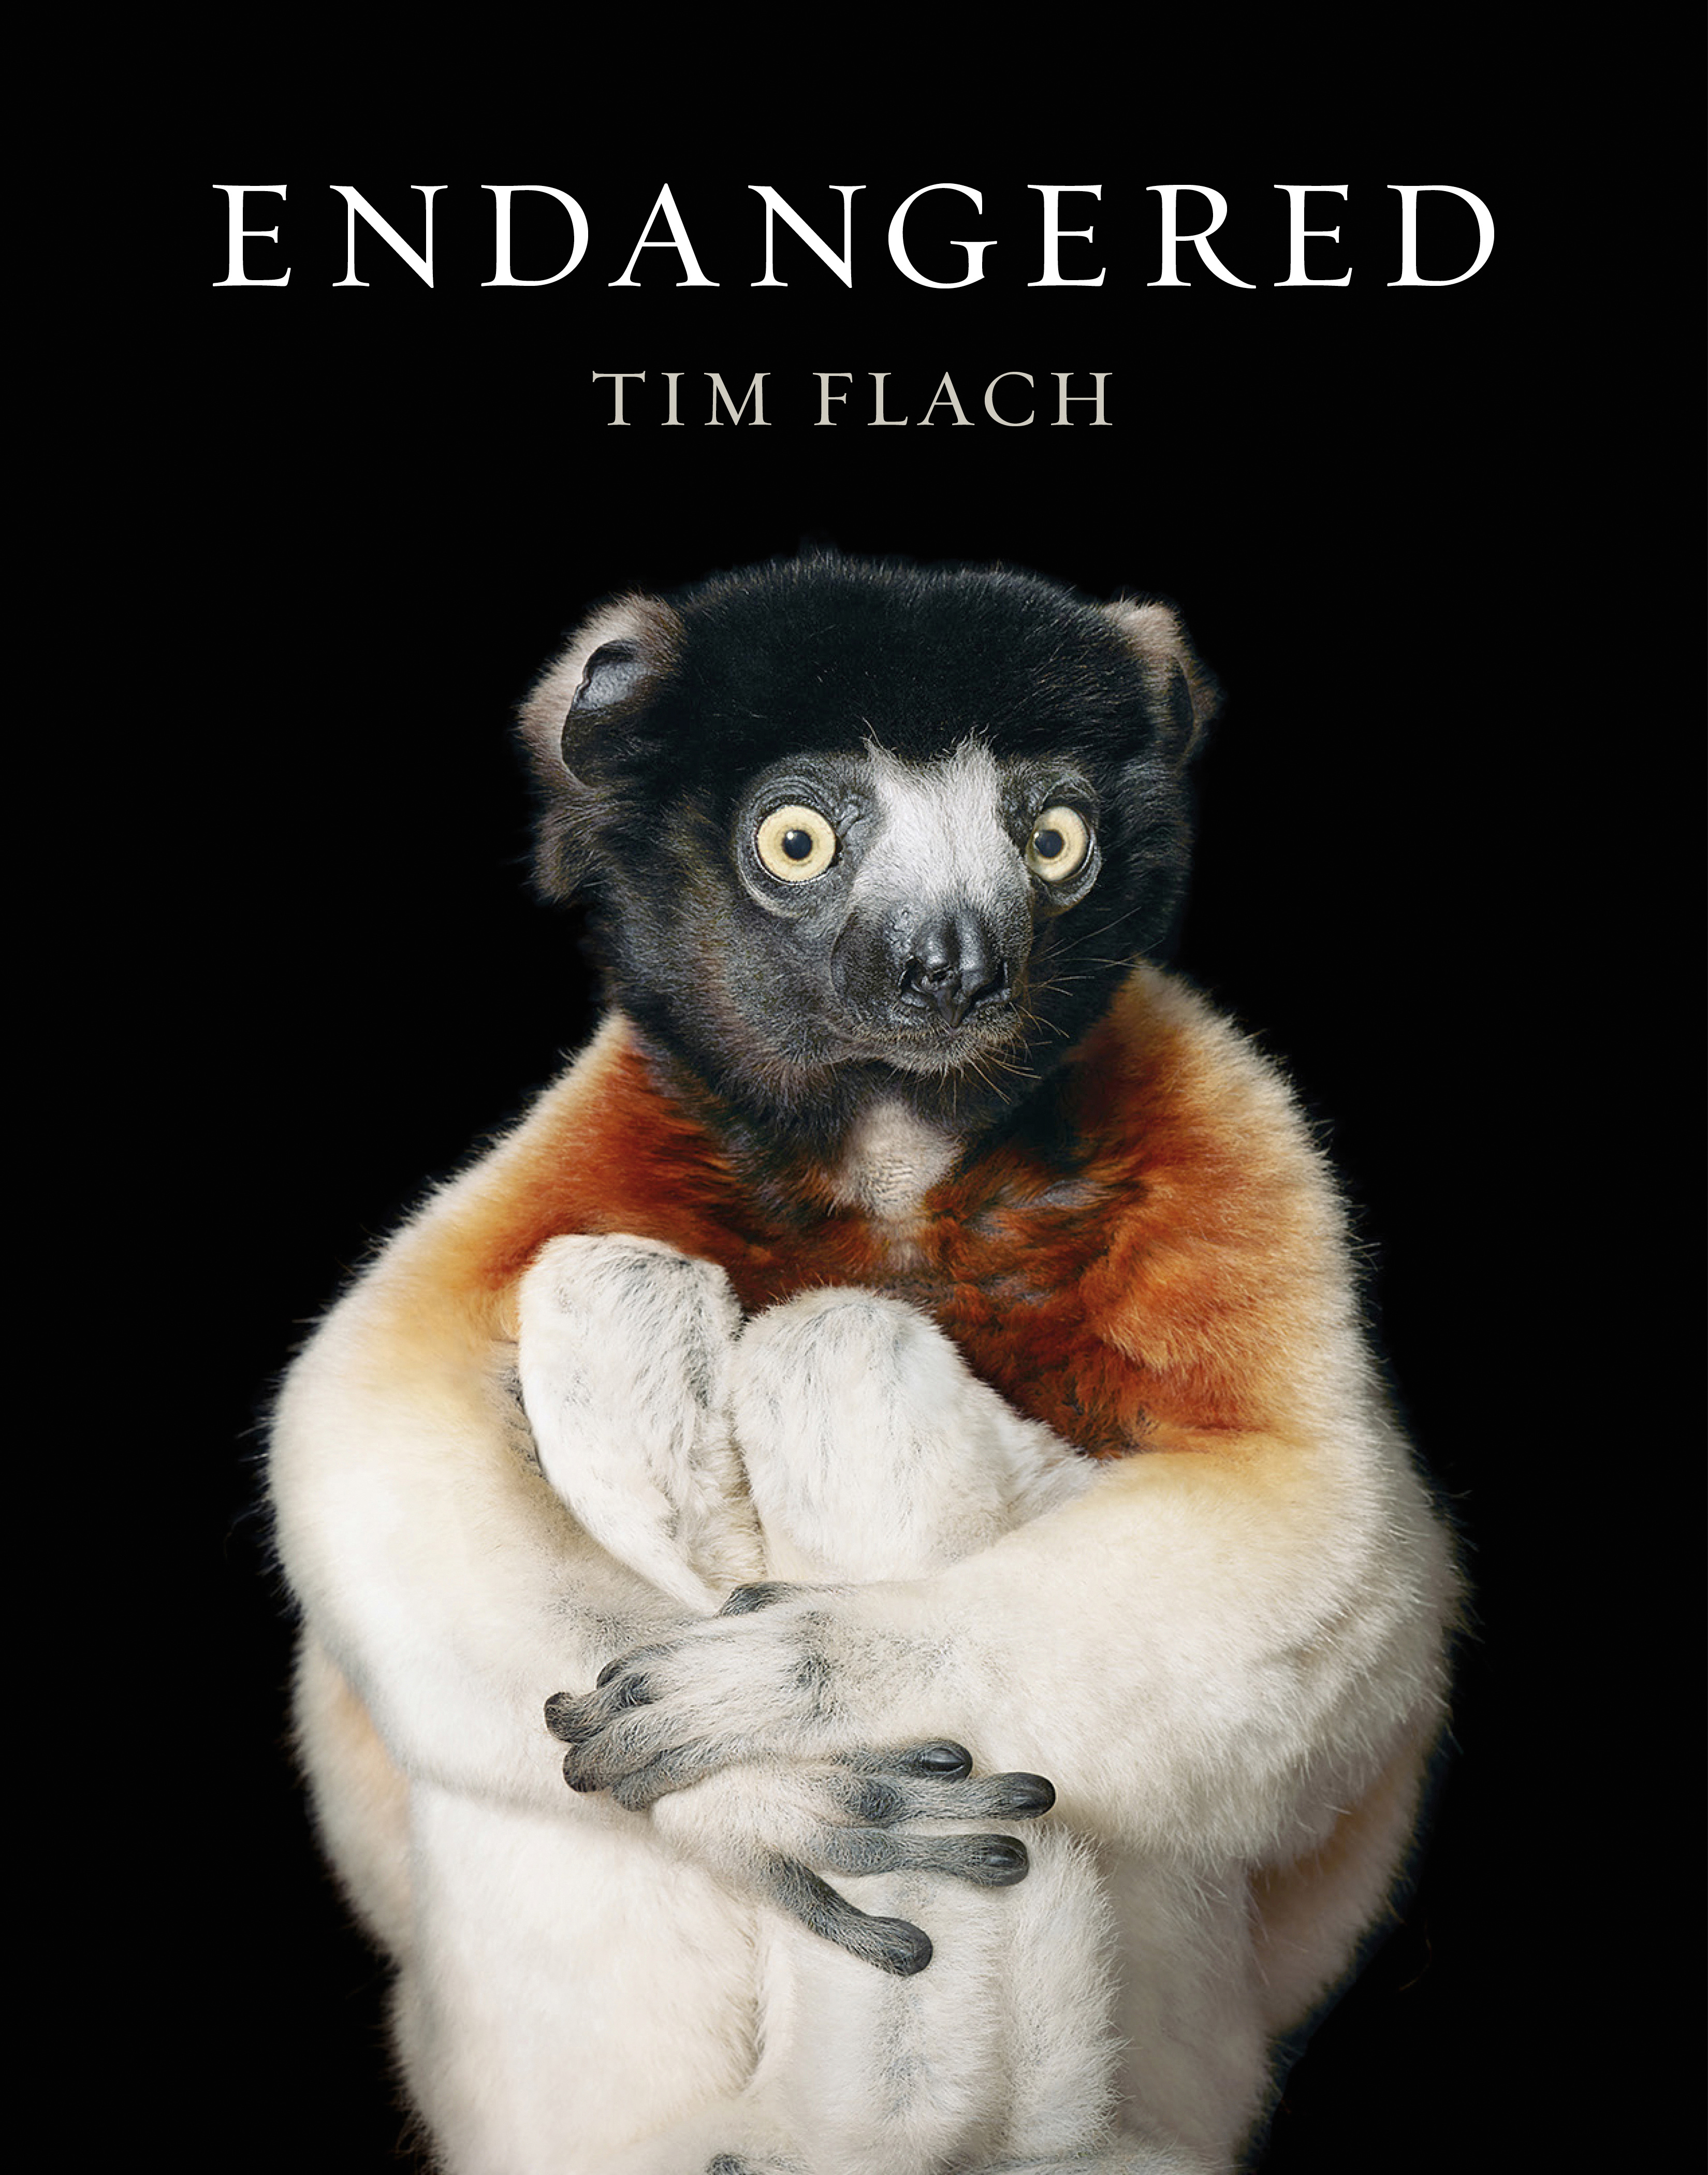 Book credit: Endangered by Tim Flach and text by Jonathan Baillie (Abrams) Image credit: © 2017 Tim Flach